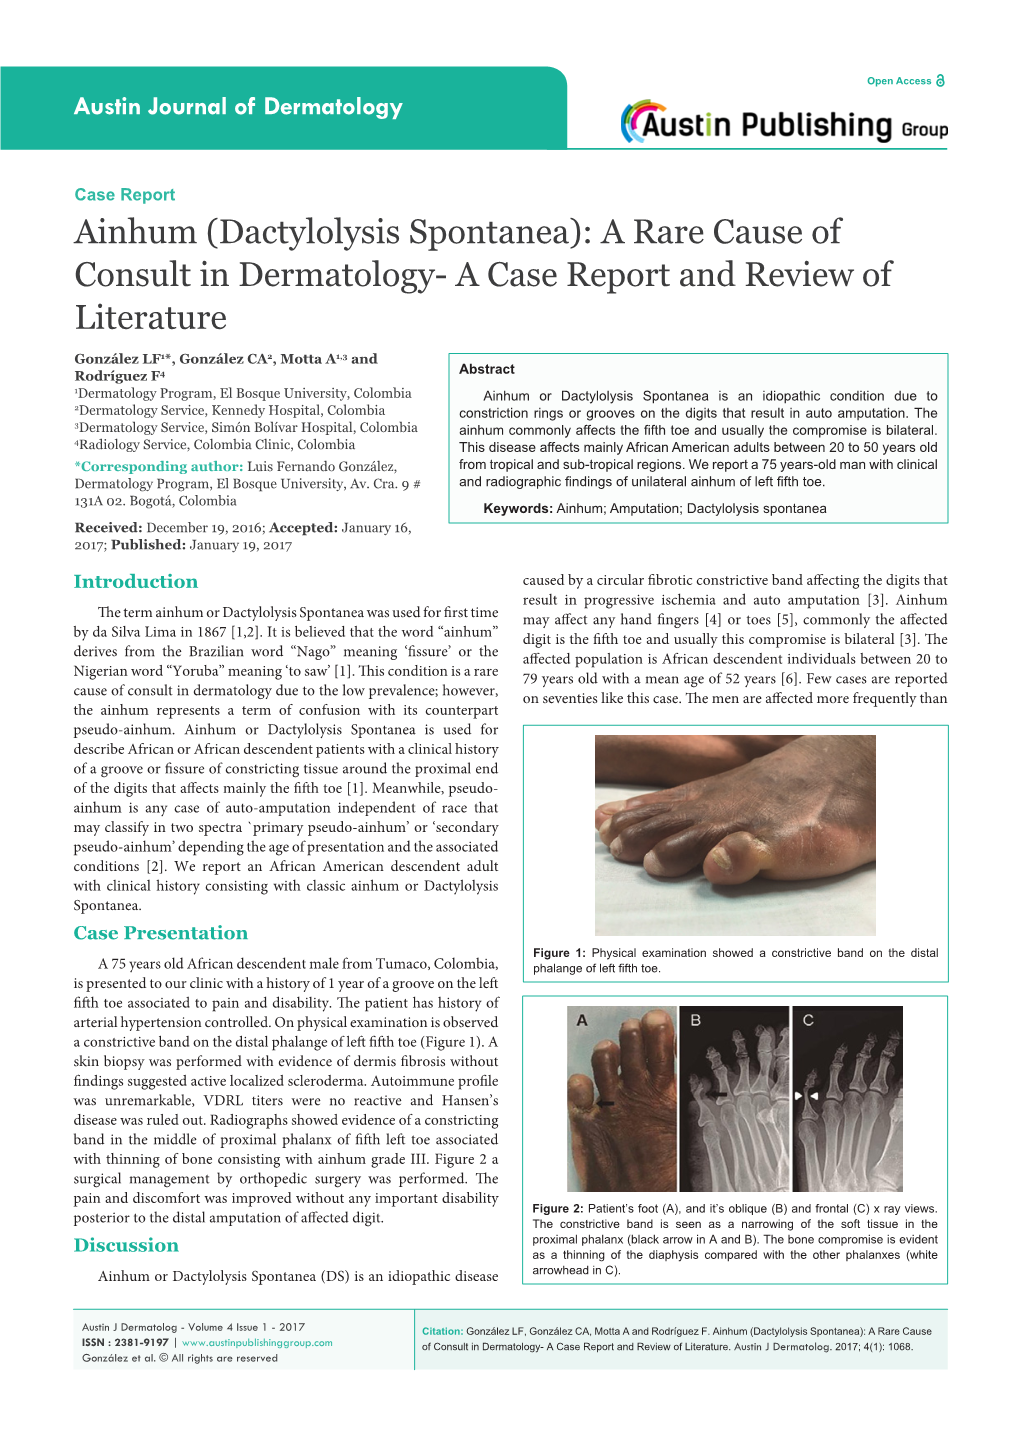 Dactylolysis Spontanea): a Rare Cause of Consult in Dermatology- a Case Report and Review of Literature